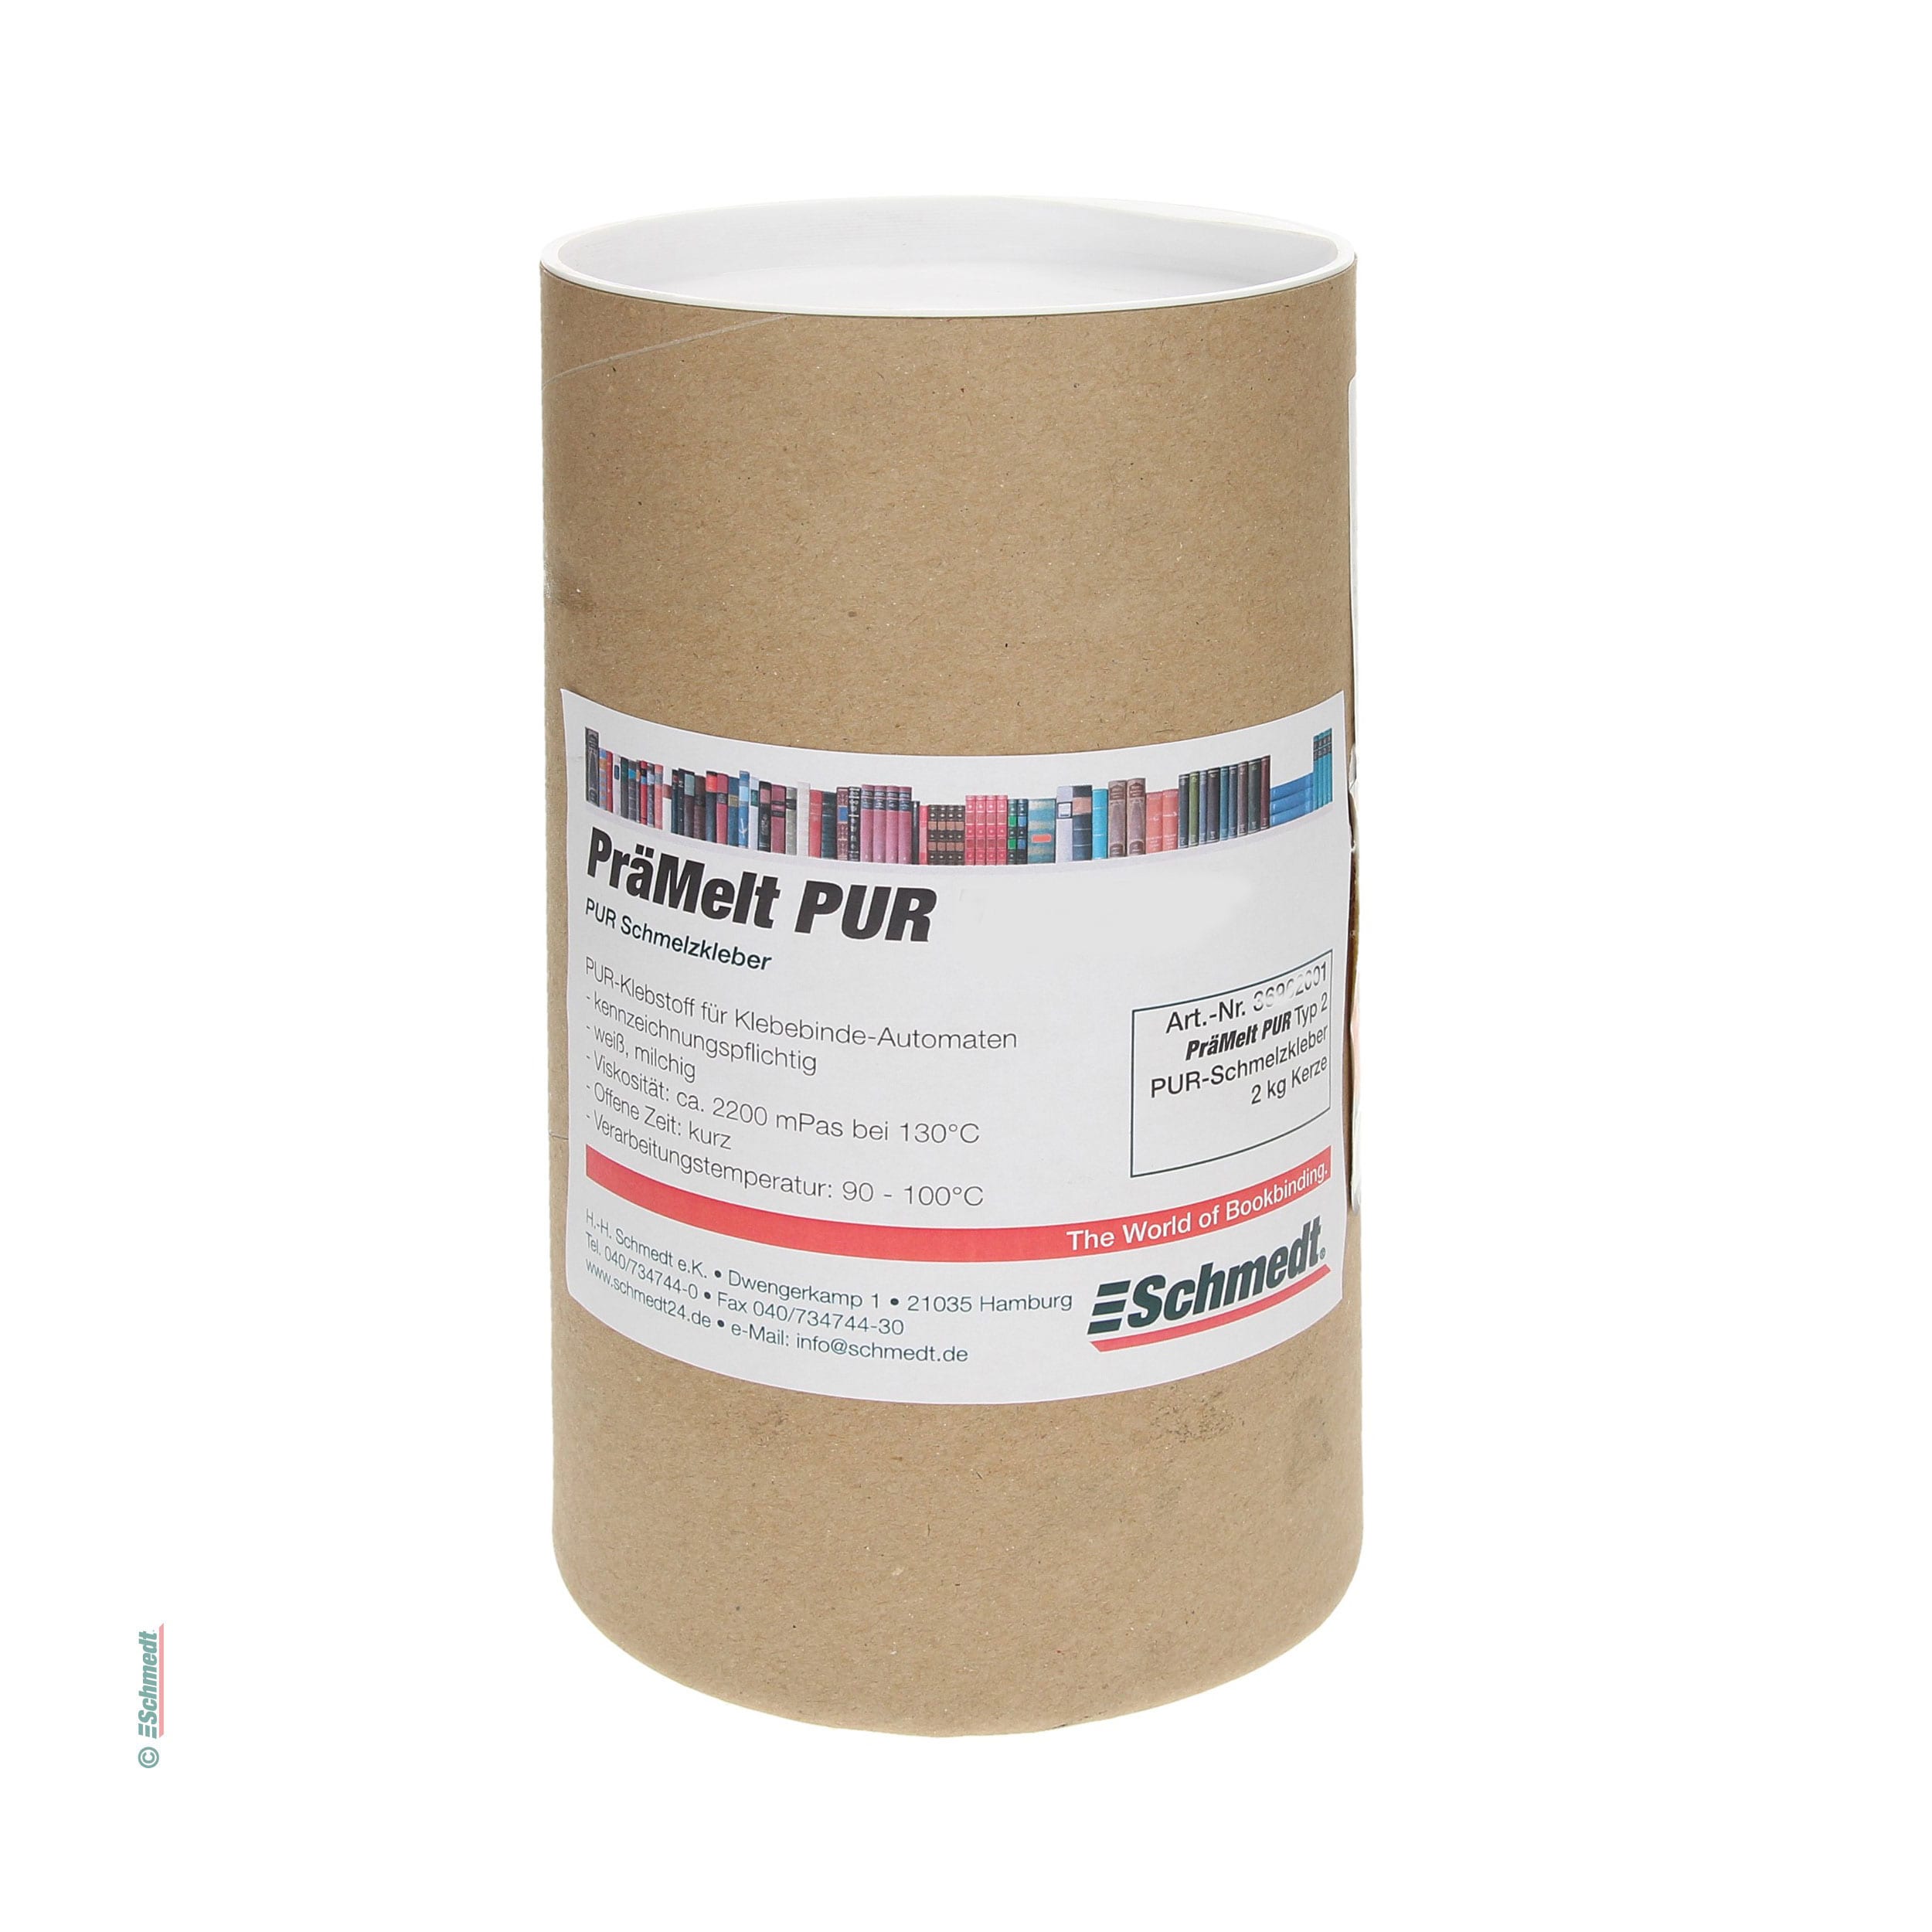 PräMelt PUR 3317 - PUR adhesive for perfect binders - PräMelt PUR 3317 is a reactive PU hotmelt with medium wet life. Besides gluing the spi...